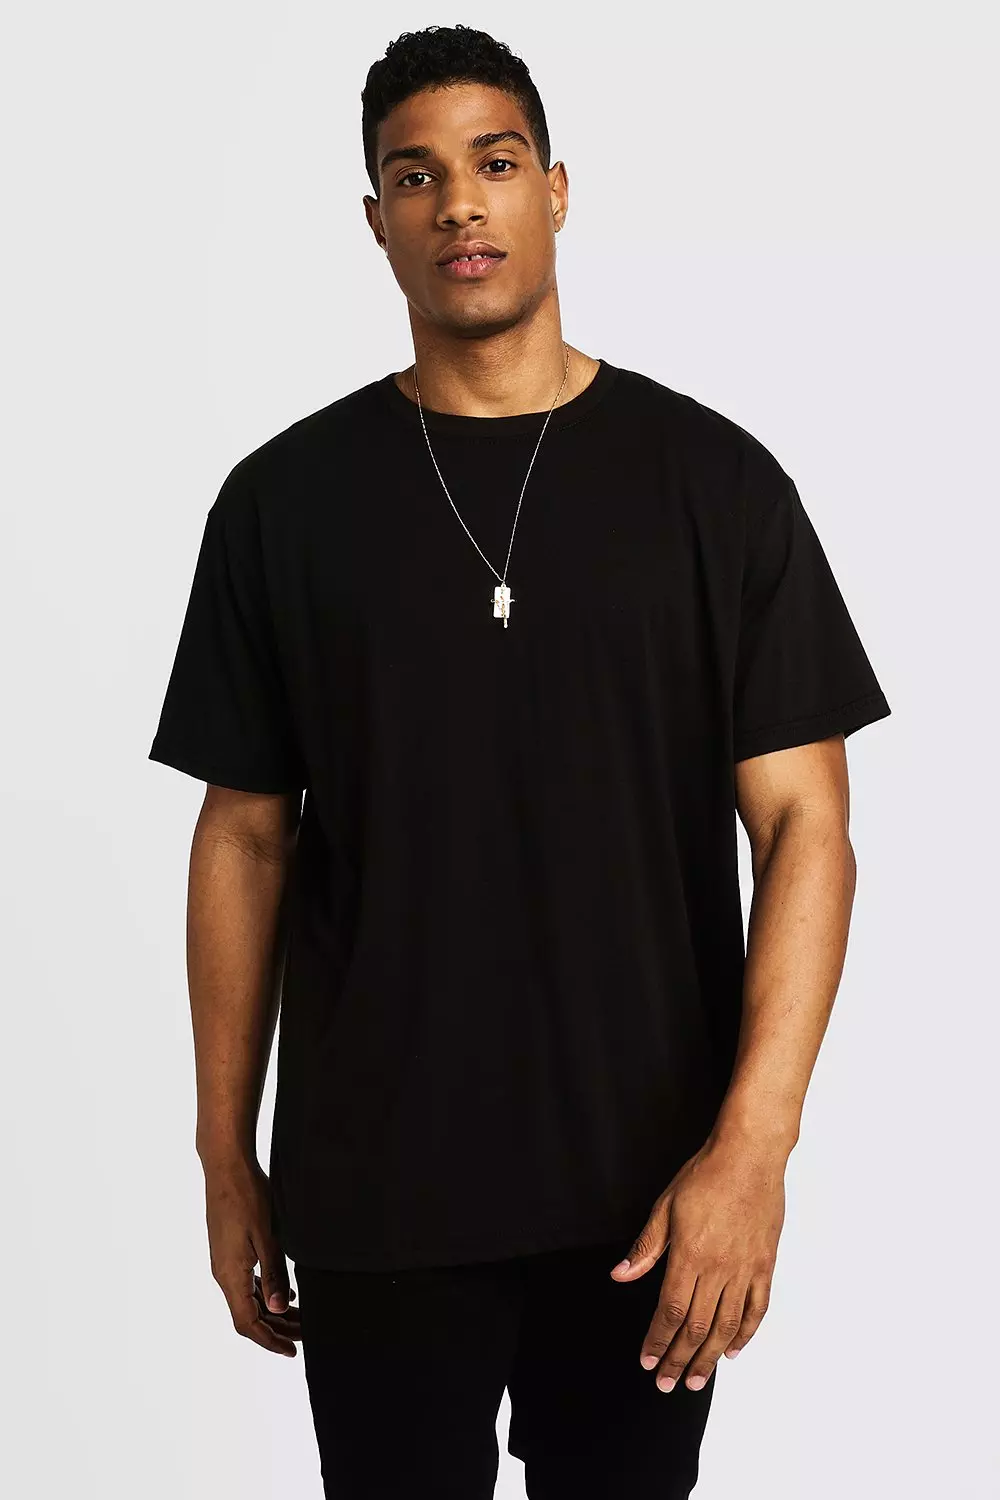 Black Men's Loose Fit Solid Oversized 3/4 Sleeves Cotton T-shirt, Casual  Wear